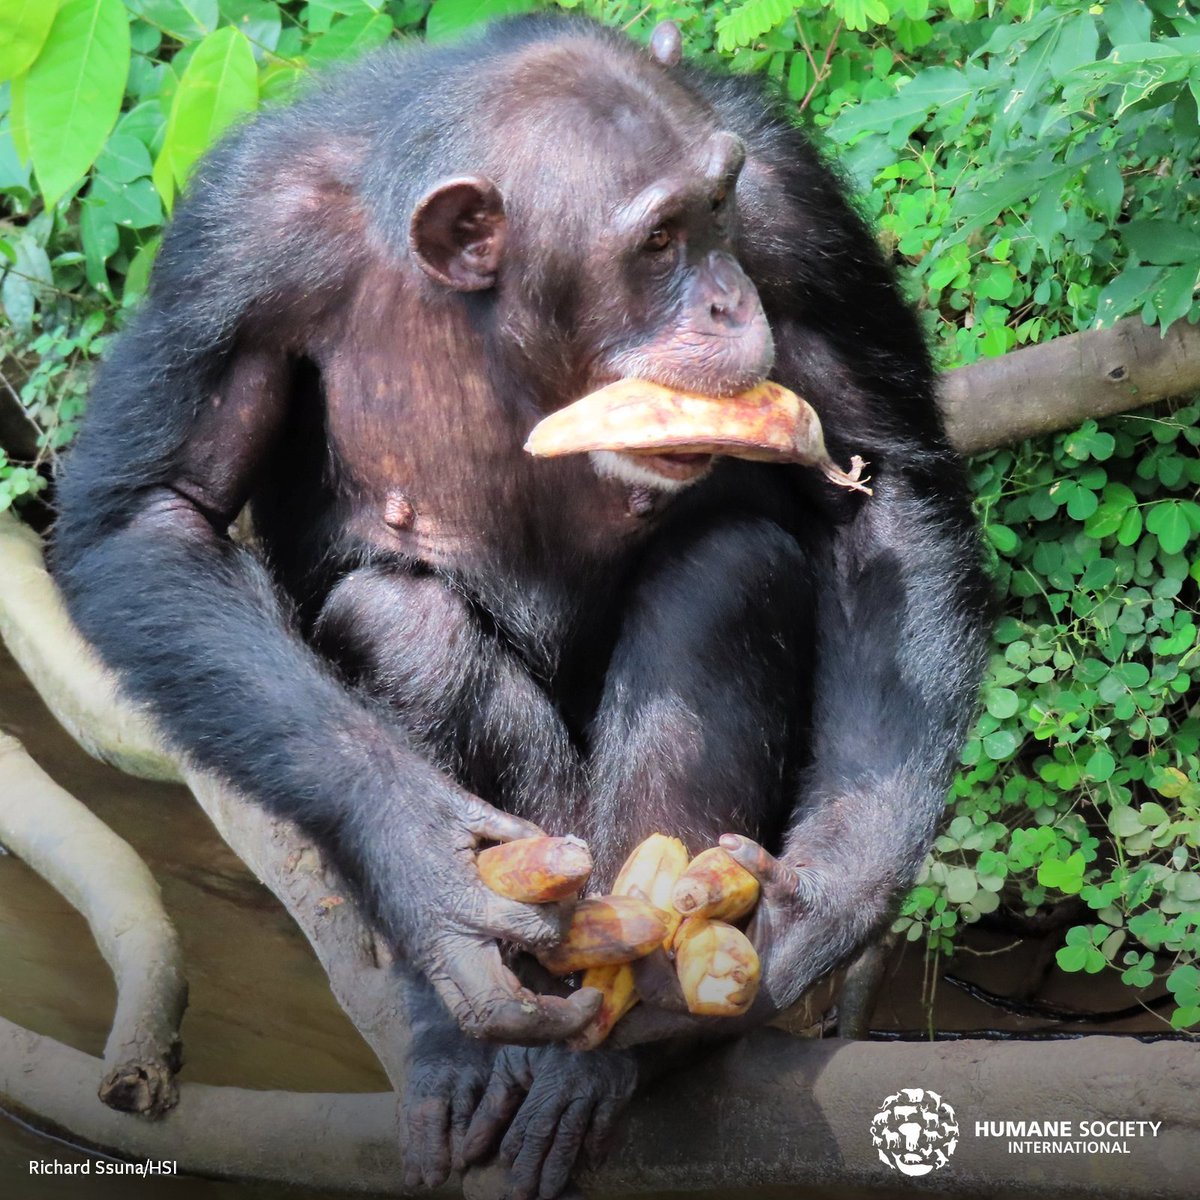 Happy #NationalBananaDay! 🍌 Mallak—who lives at Second Chance Chimpanzee Refuge Liberia, our sanctuary in Africa for chimpanzees used in biomedical research experiments—knows exactly how to celebrate!